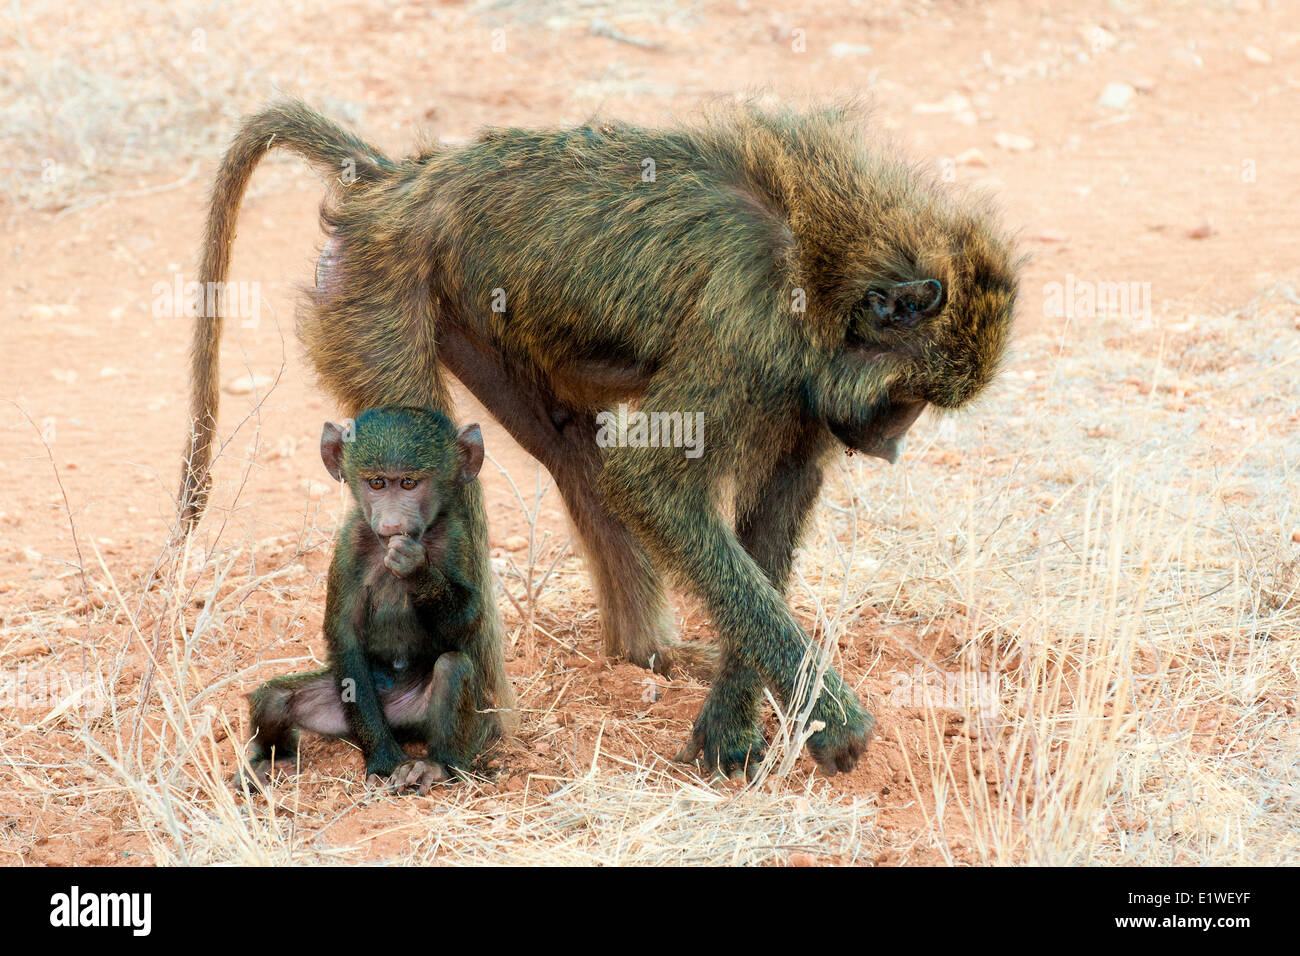 Olive baboon (Papio anubis) mother foraging for seeds while her newborn rests on her leg, Kenya, East Africa Stock Photo